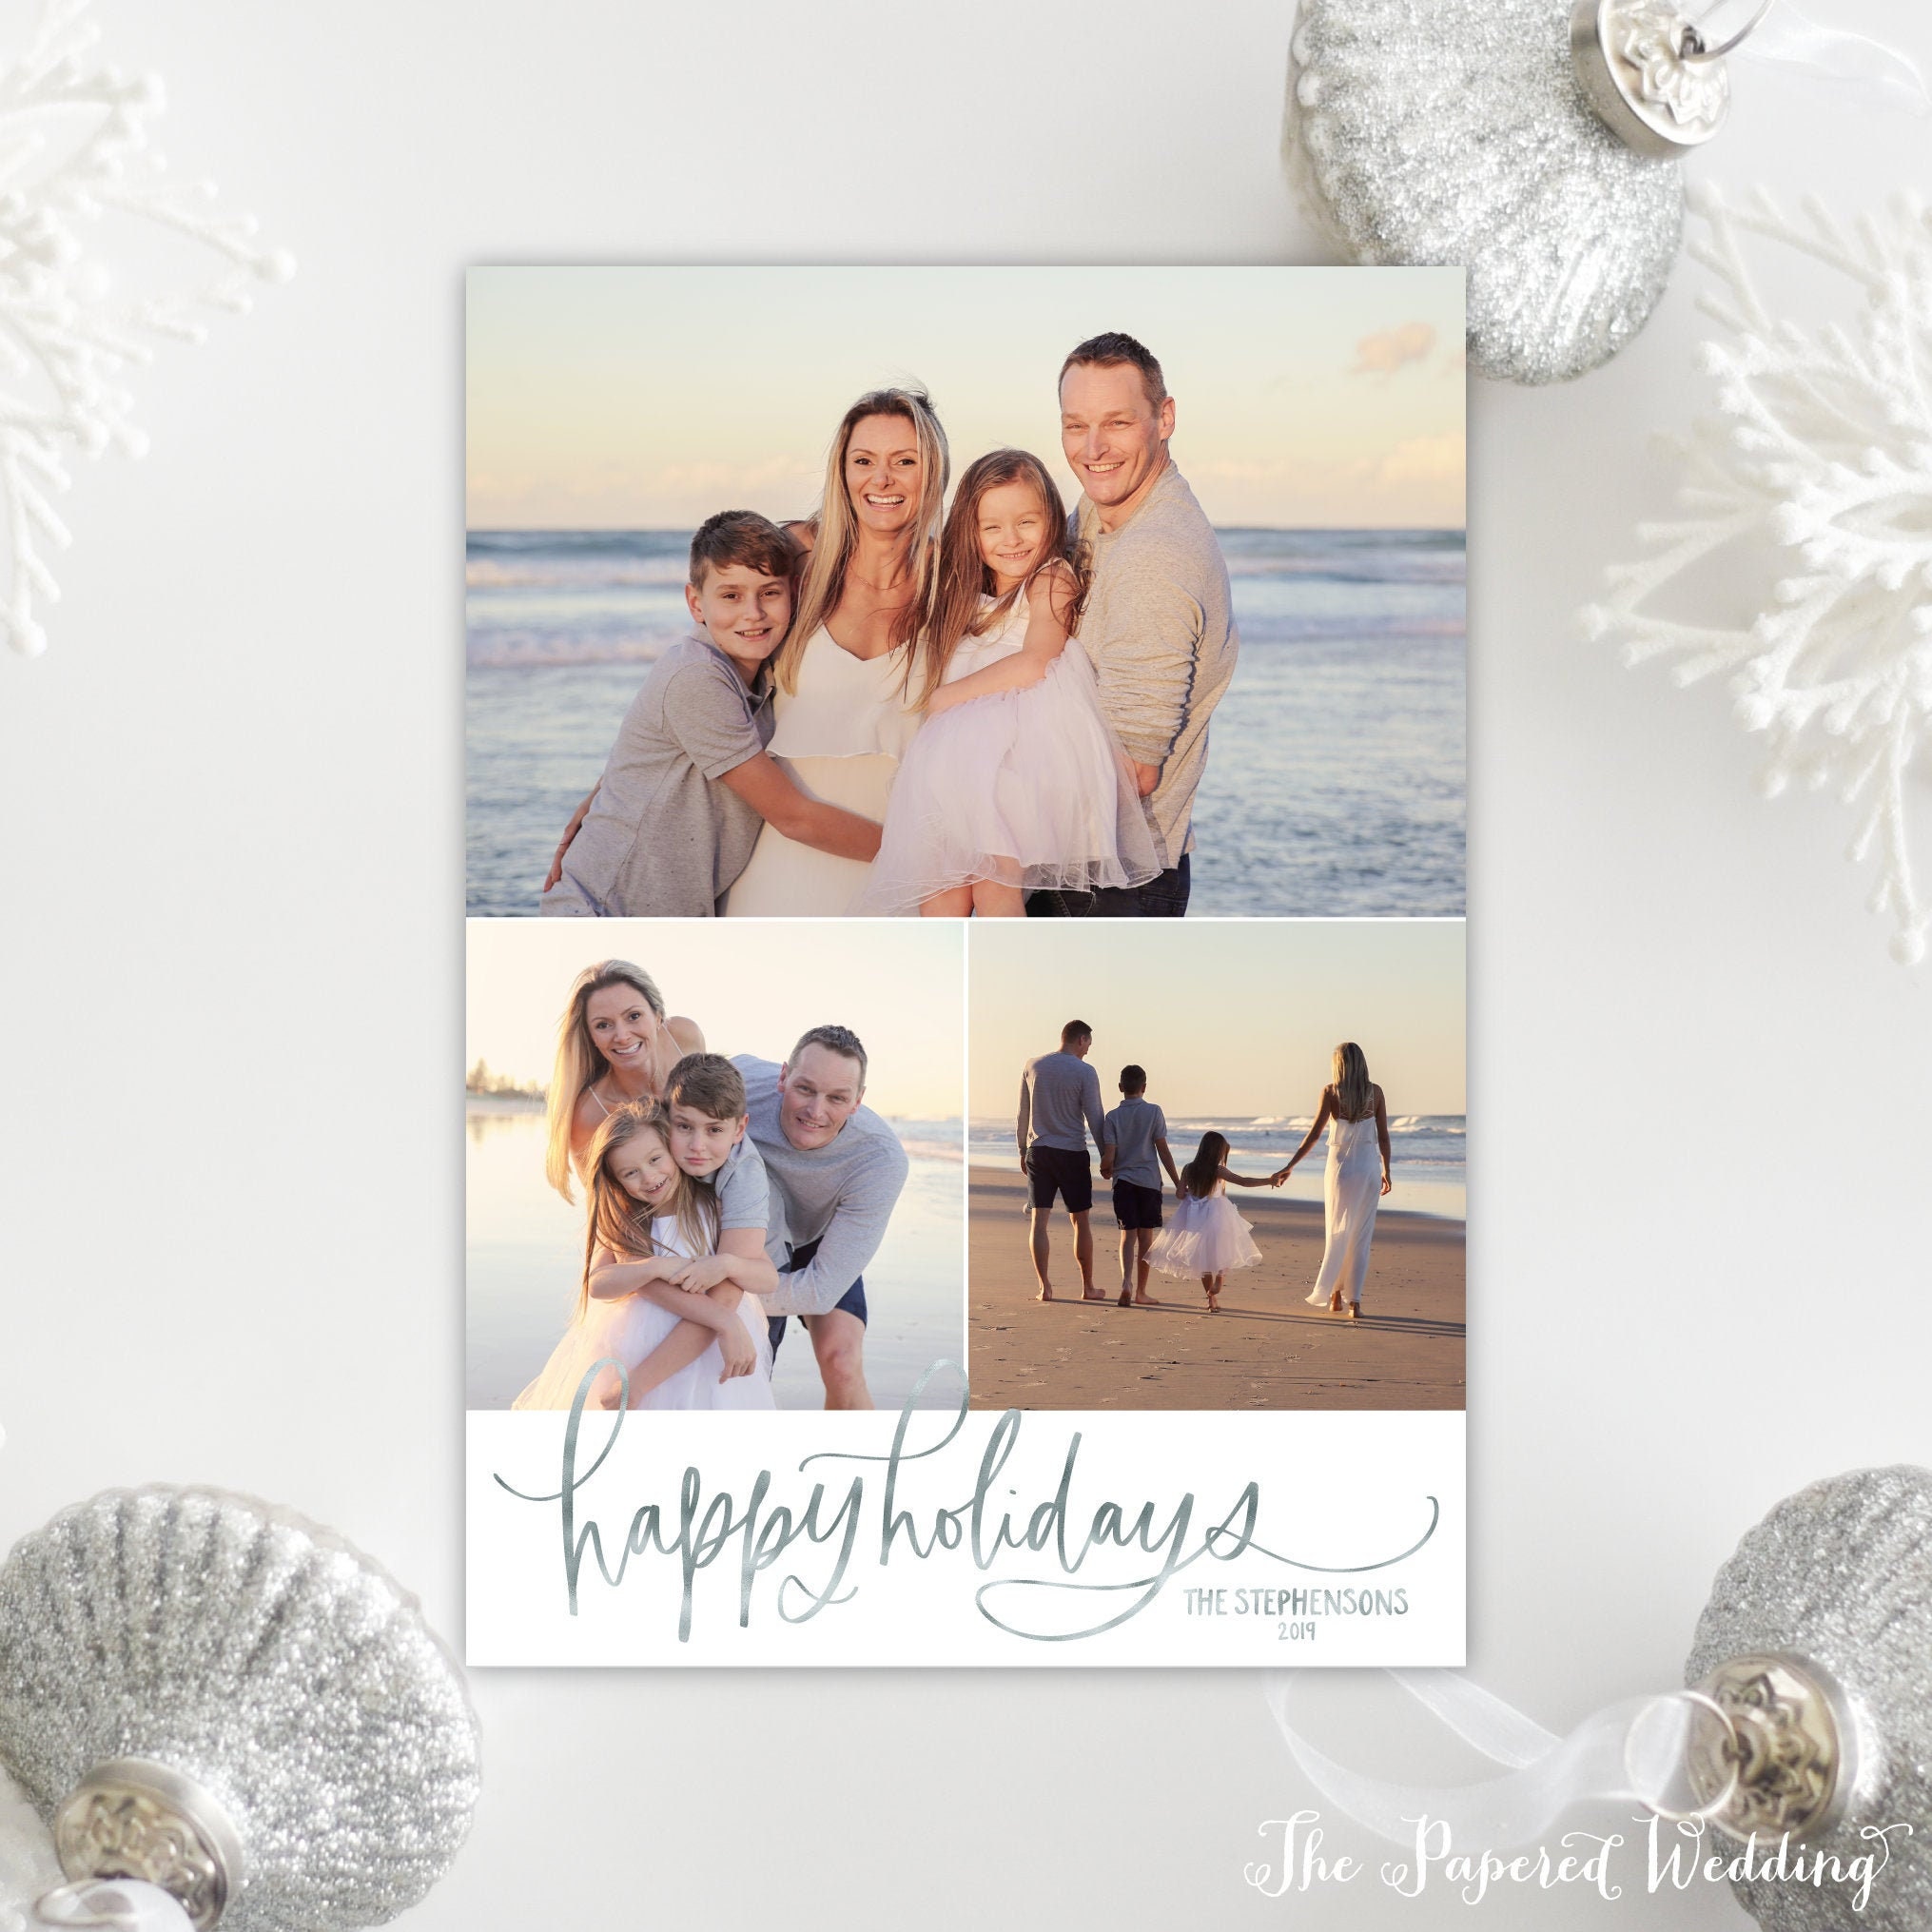 Printable Or Printed Happy Holidays Photo Cards in Faux Silver Foil - Three Pictures Christmas Holidays, Non-Religious 070 P3"